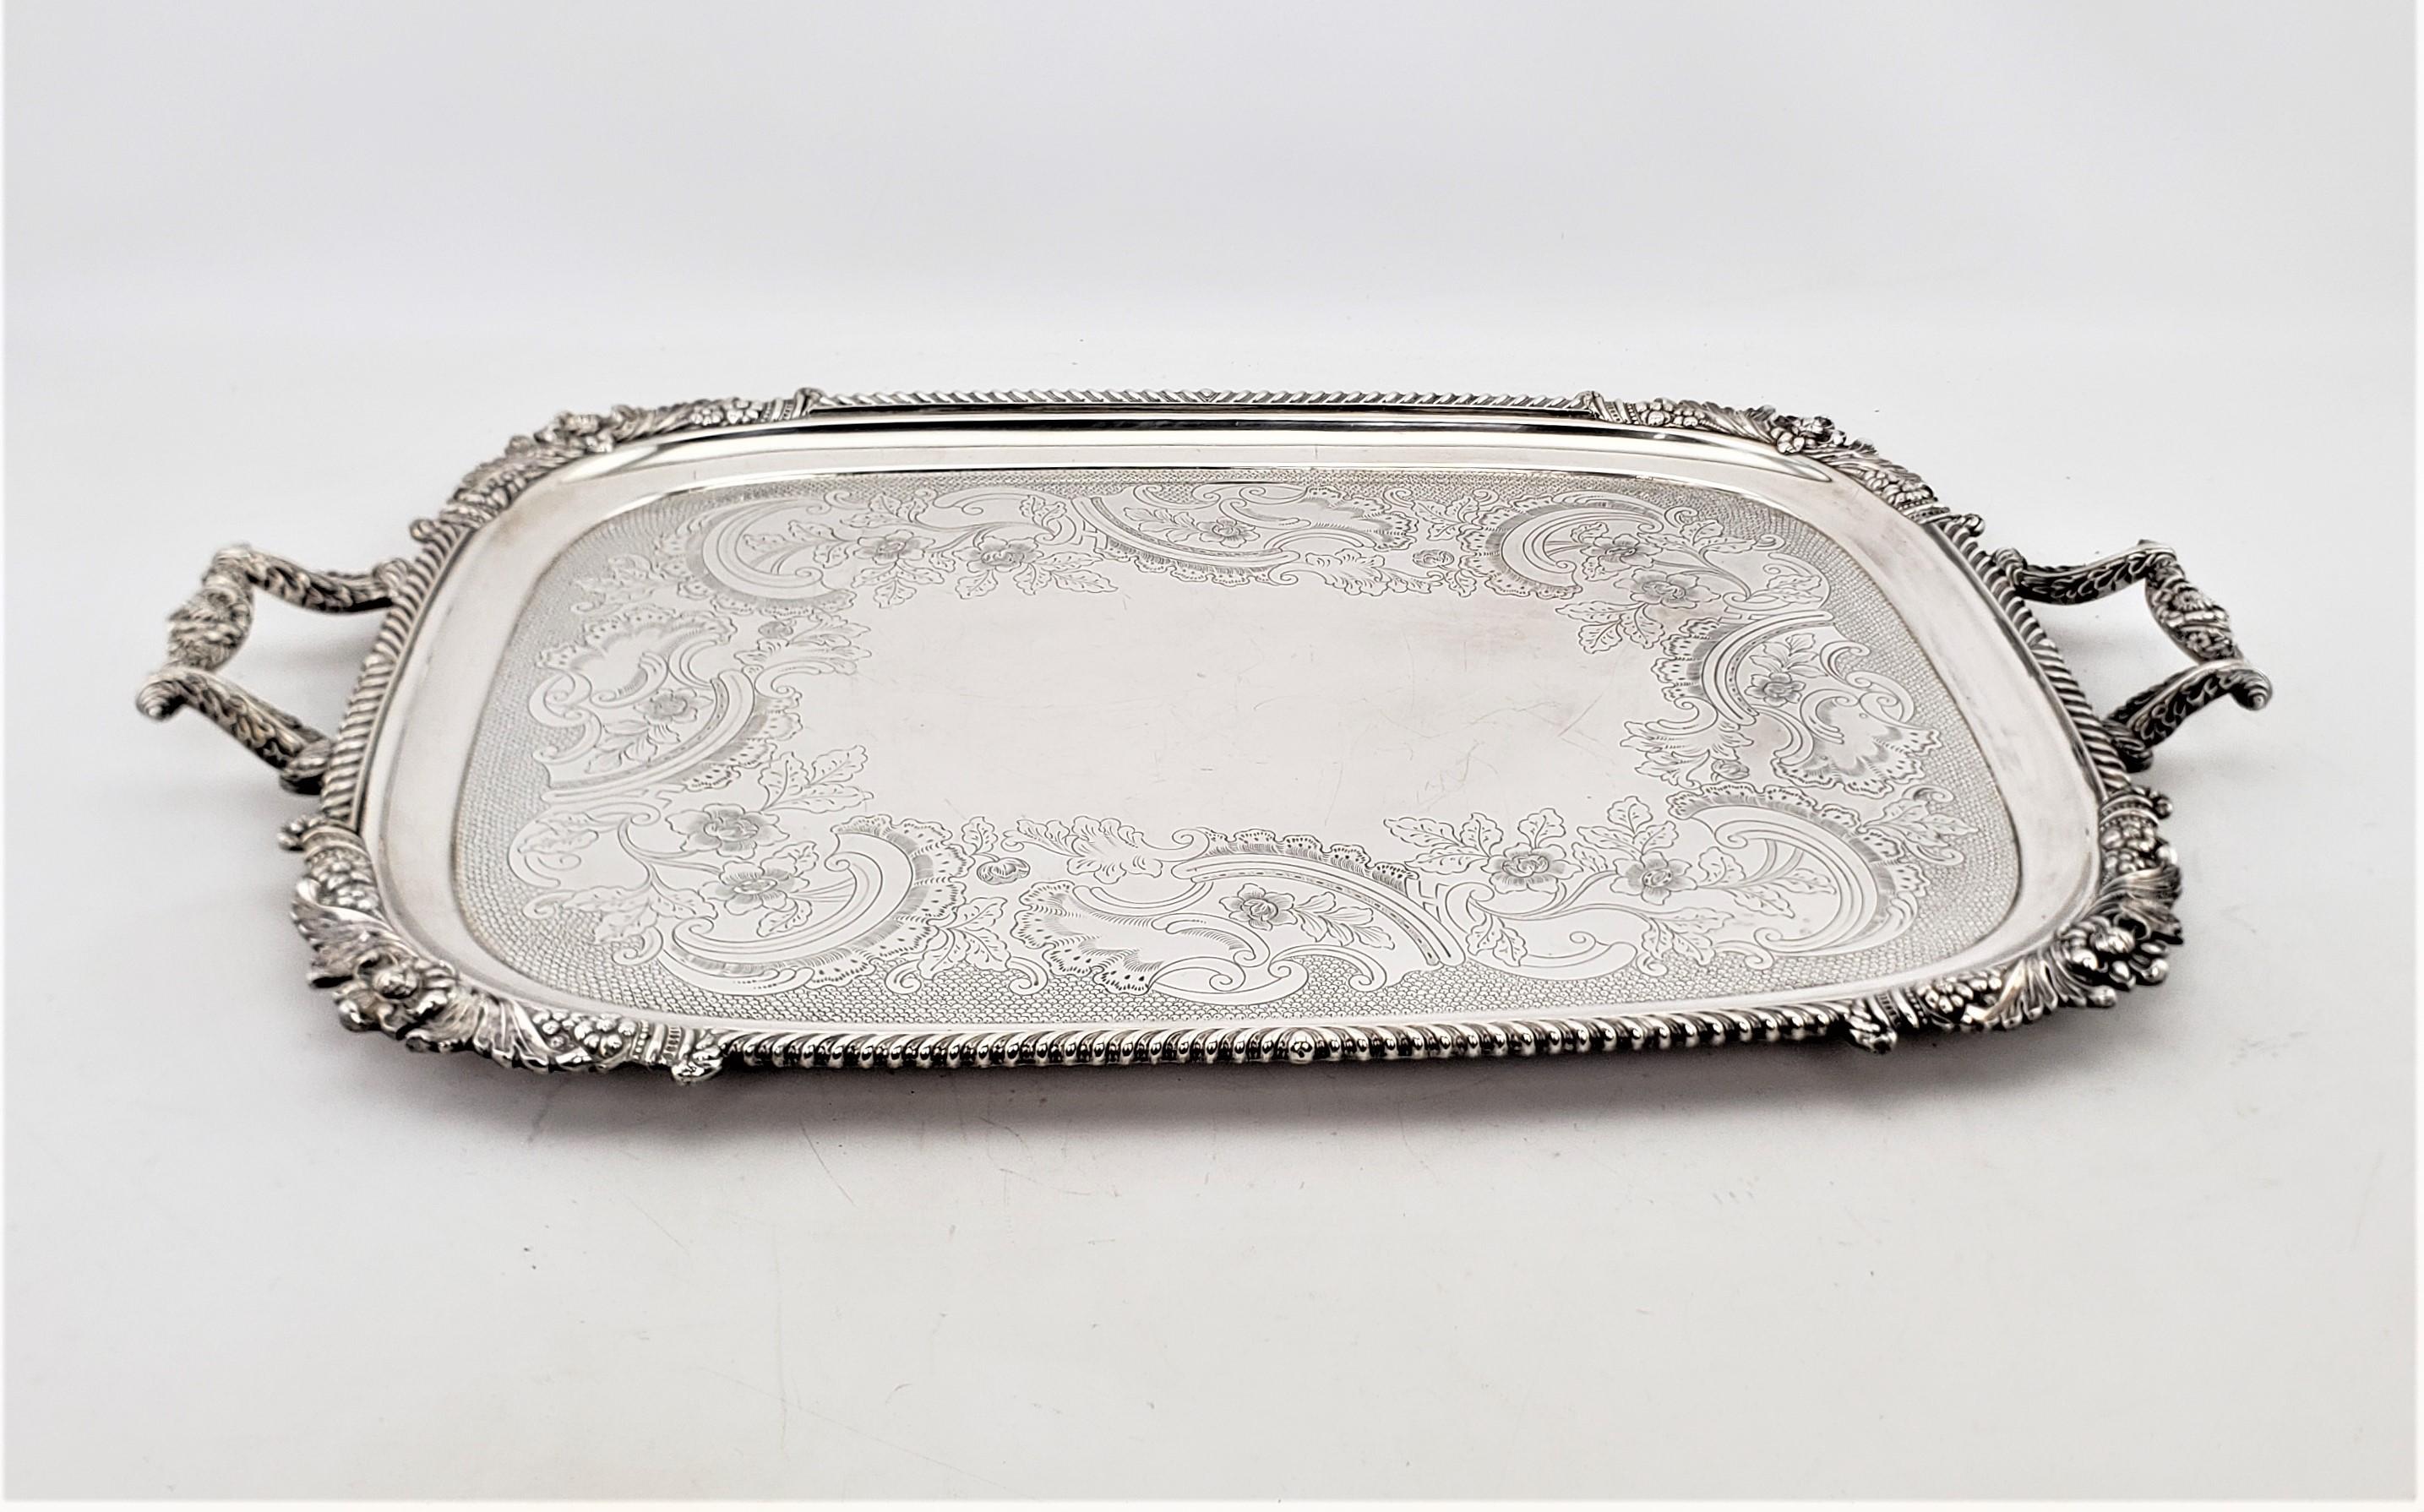 This very large and substantial serving tray was made by the well known Barker-Ellis Silver Co. of England in approximately 1920 in a Victorian style. This rectangular shaped tray is done in silver plate with applied floral decoration around the